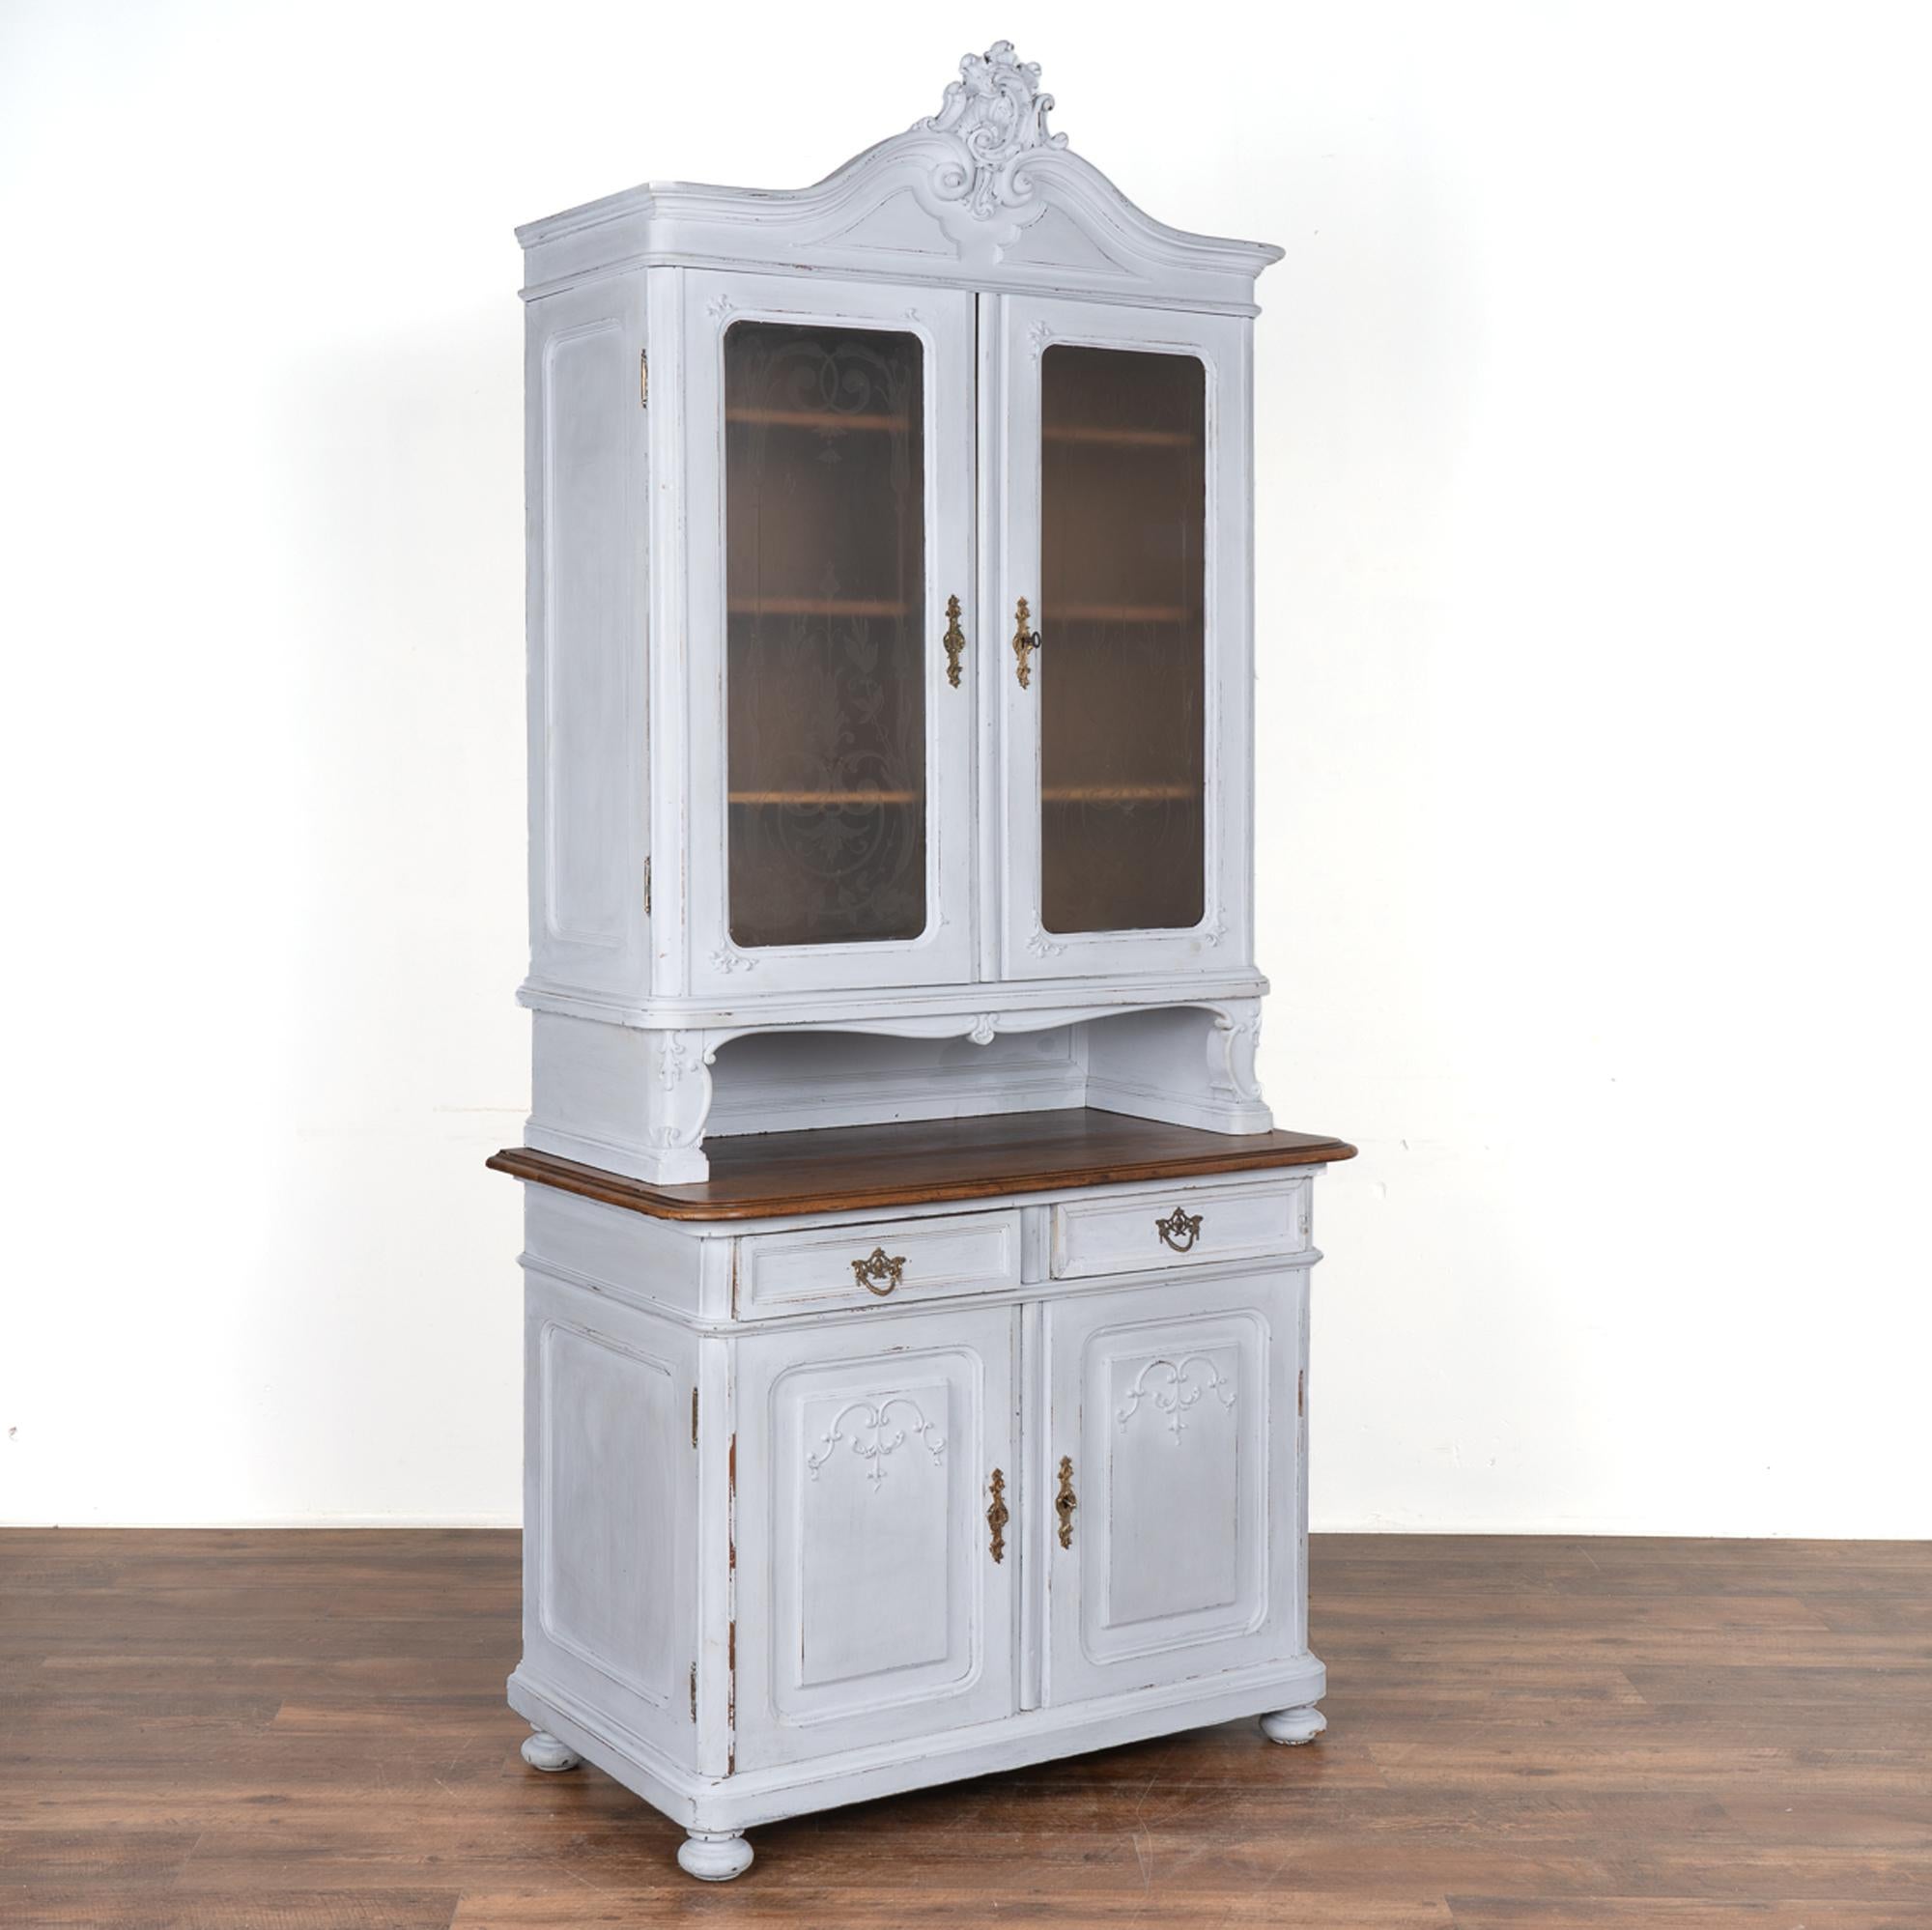 This European country pine cupboard may be used as a small buffet, display cabinet or even bookcase. The original etched glass accents the decorative applied carving that accents the panels of this charming cabinet.
The newer professionally applied